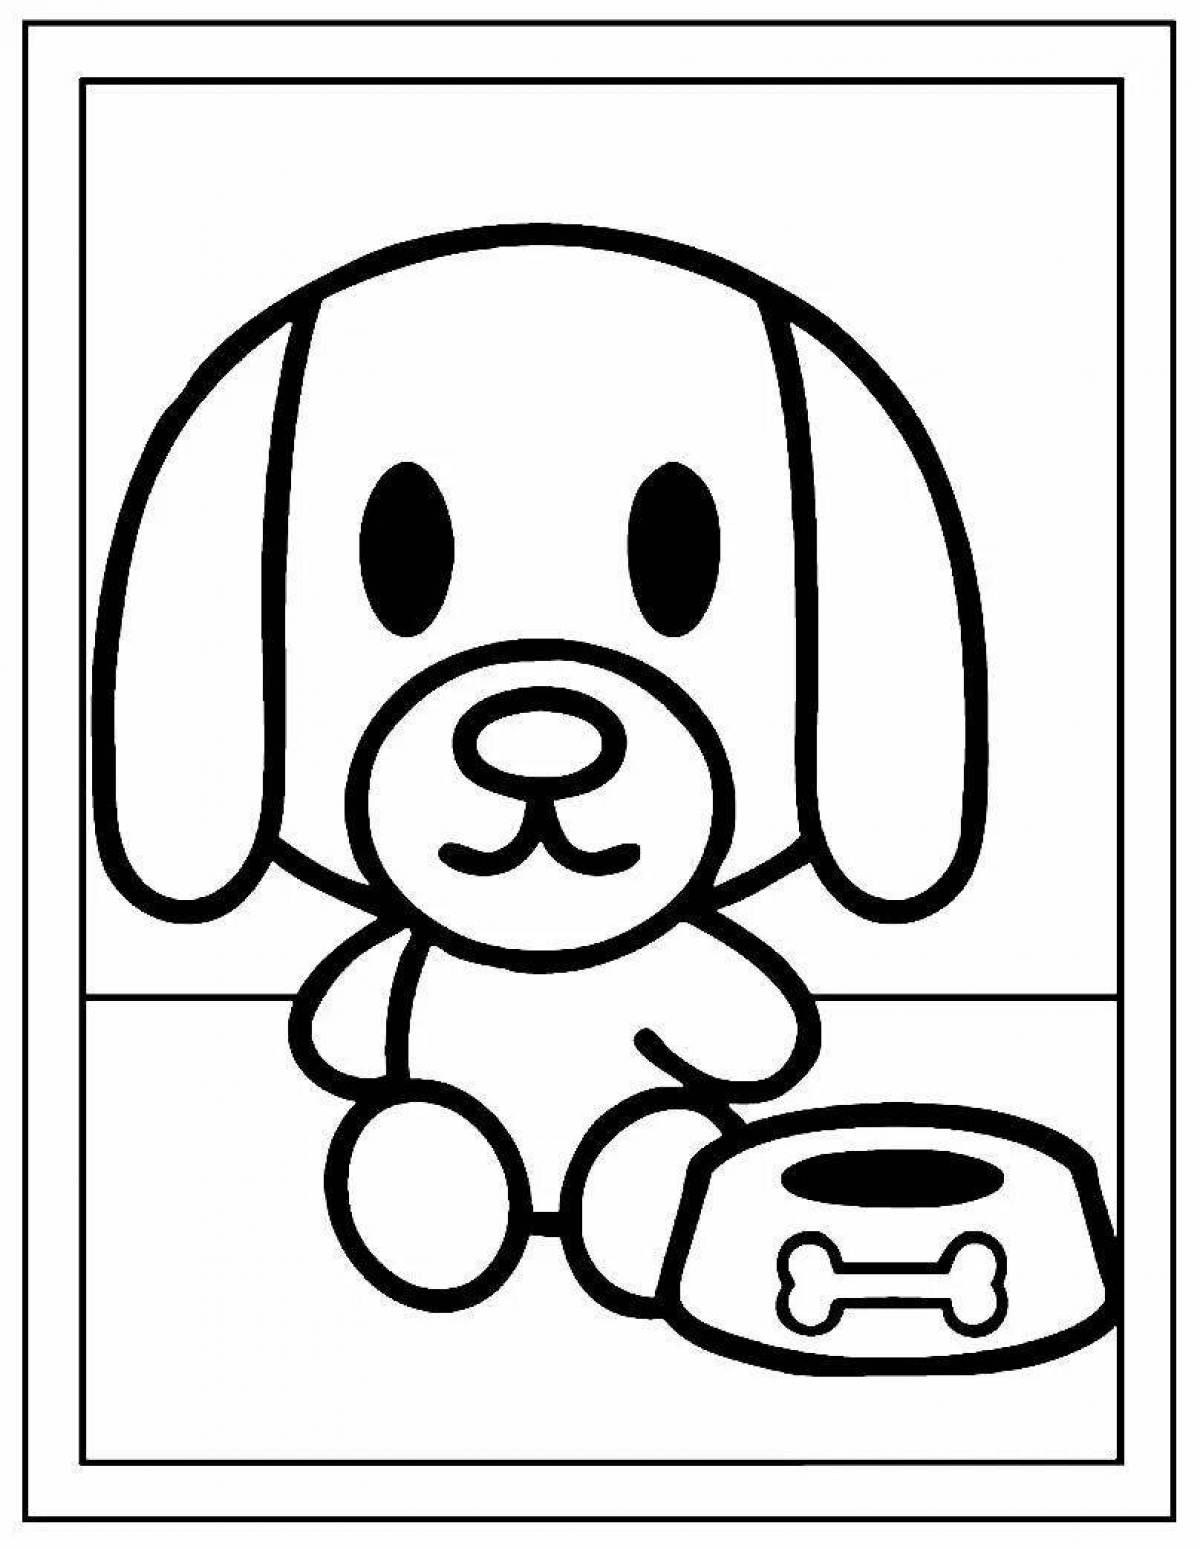 Fantastic dog coloring book for 5-6 year olds